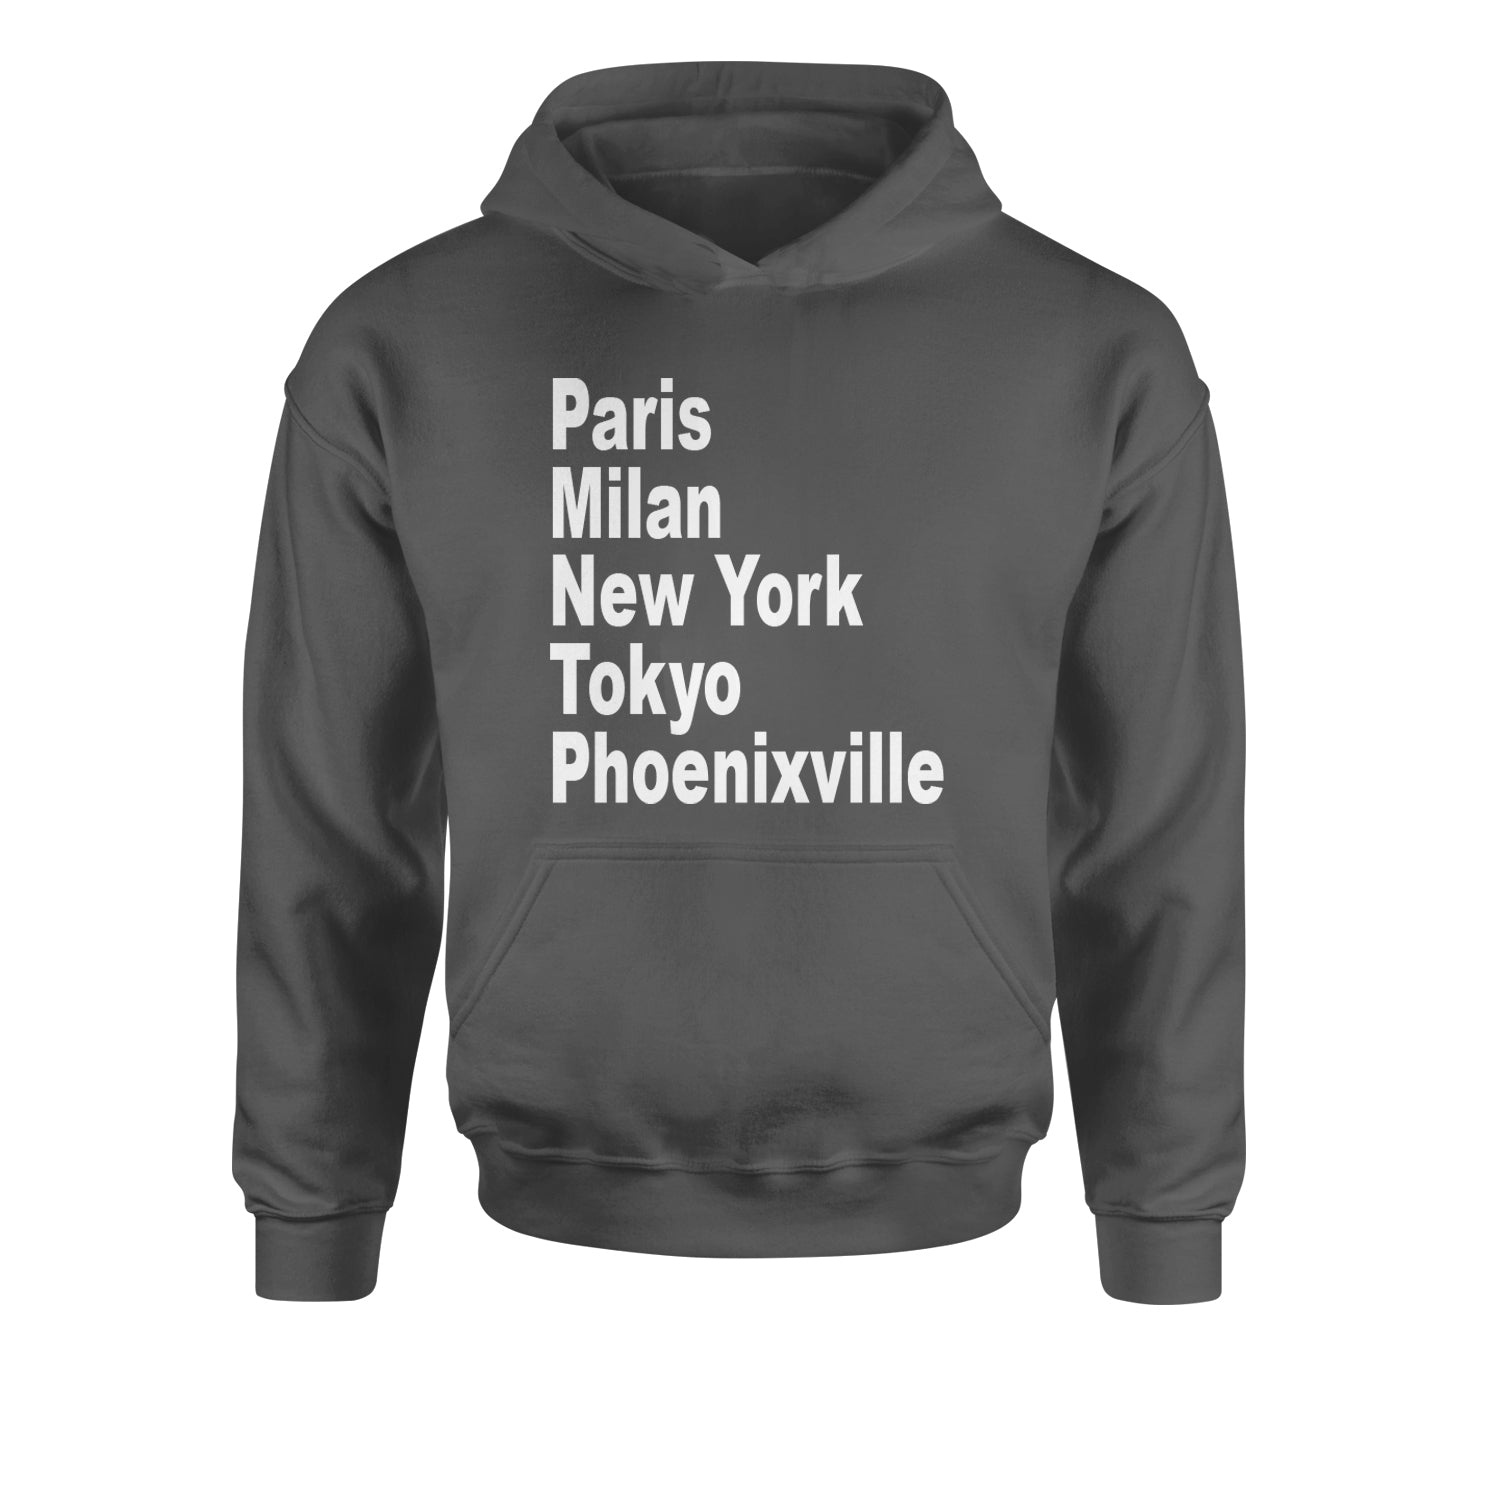 The Great Borough Of Phoenixville Youth-Sized Hoodie